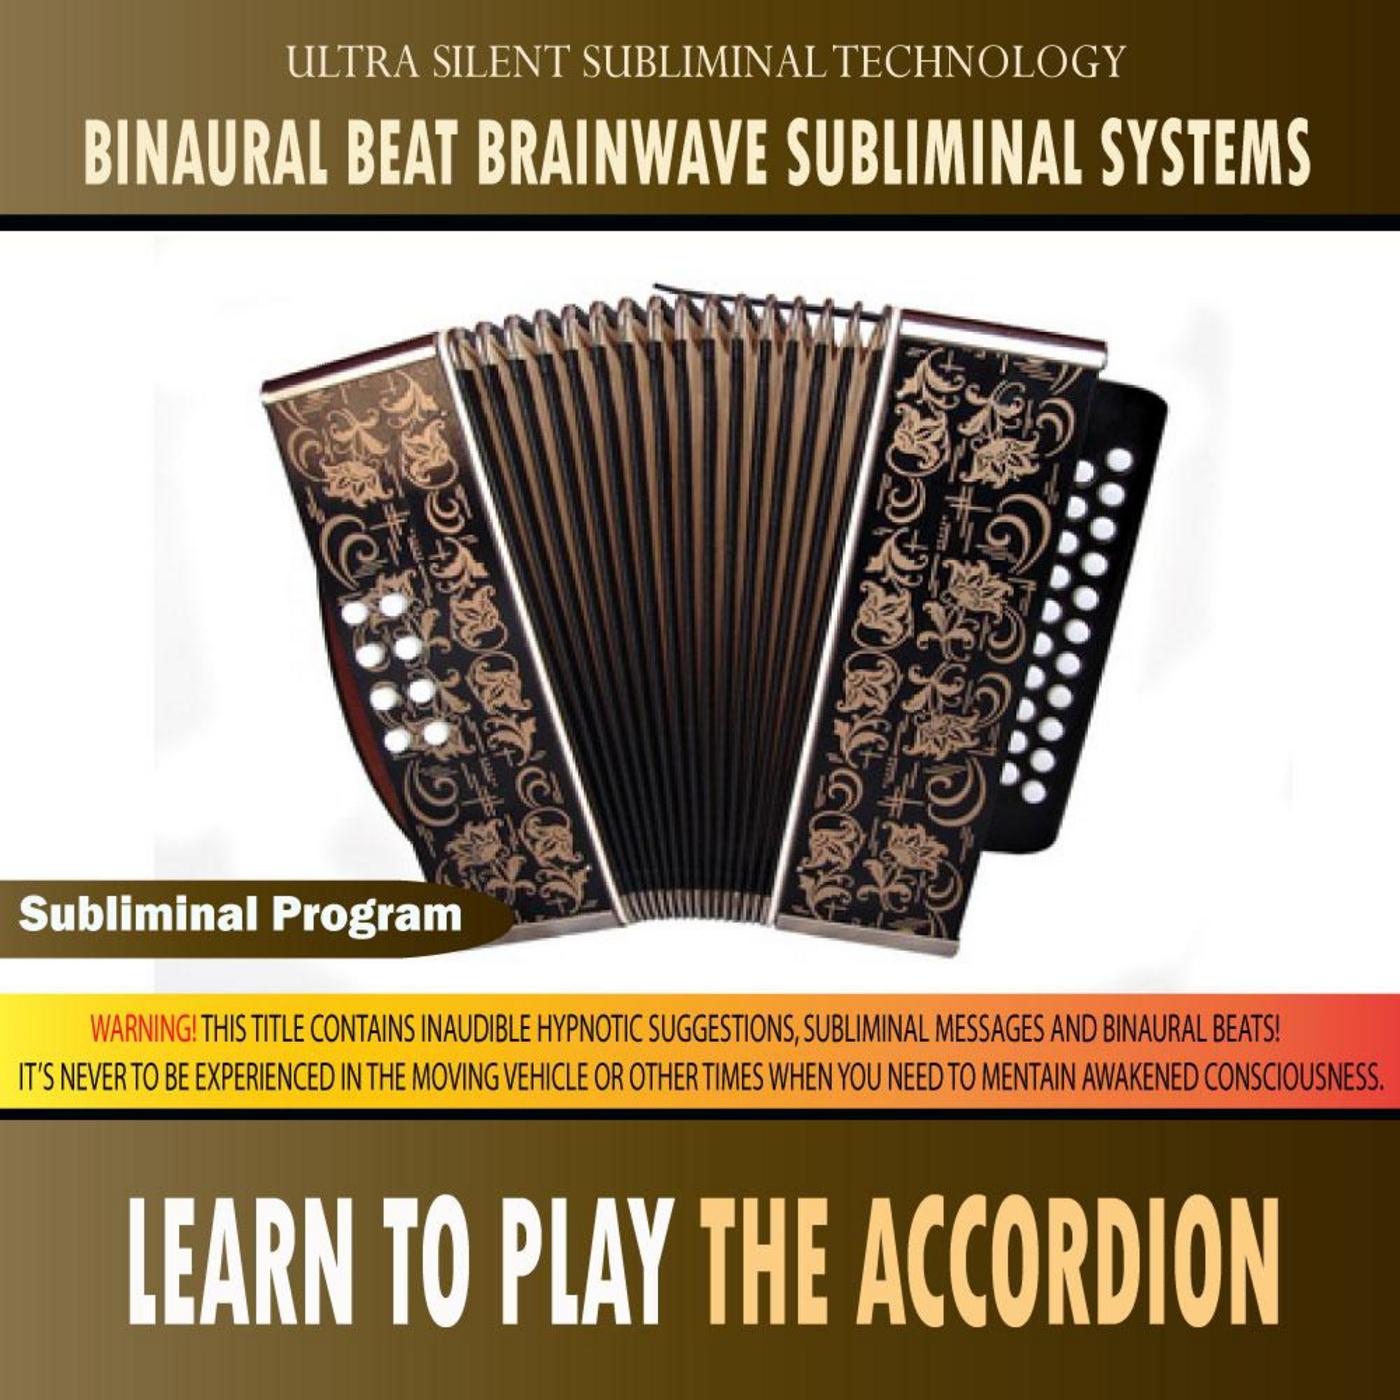 Learn to Play the Accordion - Binaural Beat Brainwave Subliminal Systems